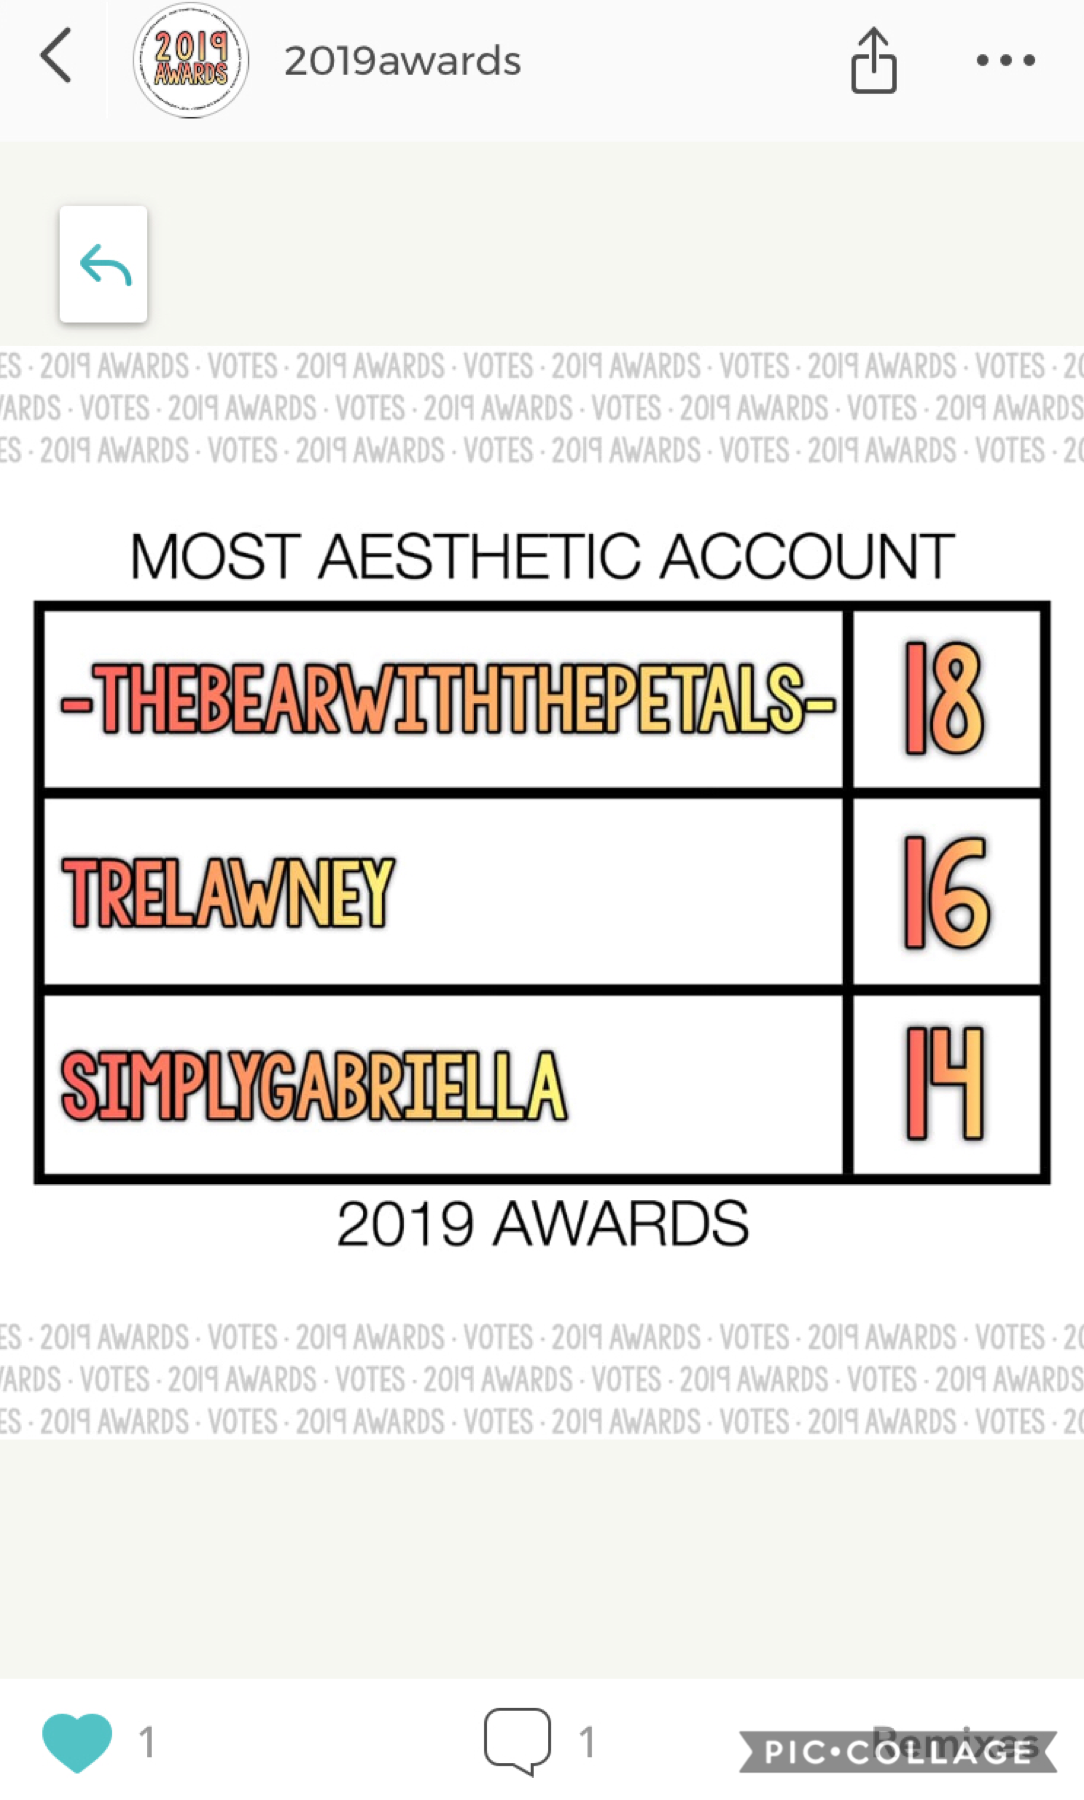 ayeee 2nd is better than nothing 😂💕 tysm to @2019Awards and everyone that voted 💕 also congrats to @-thebearwithpetals- 😁😁